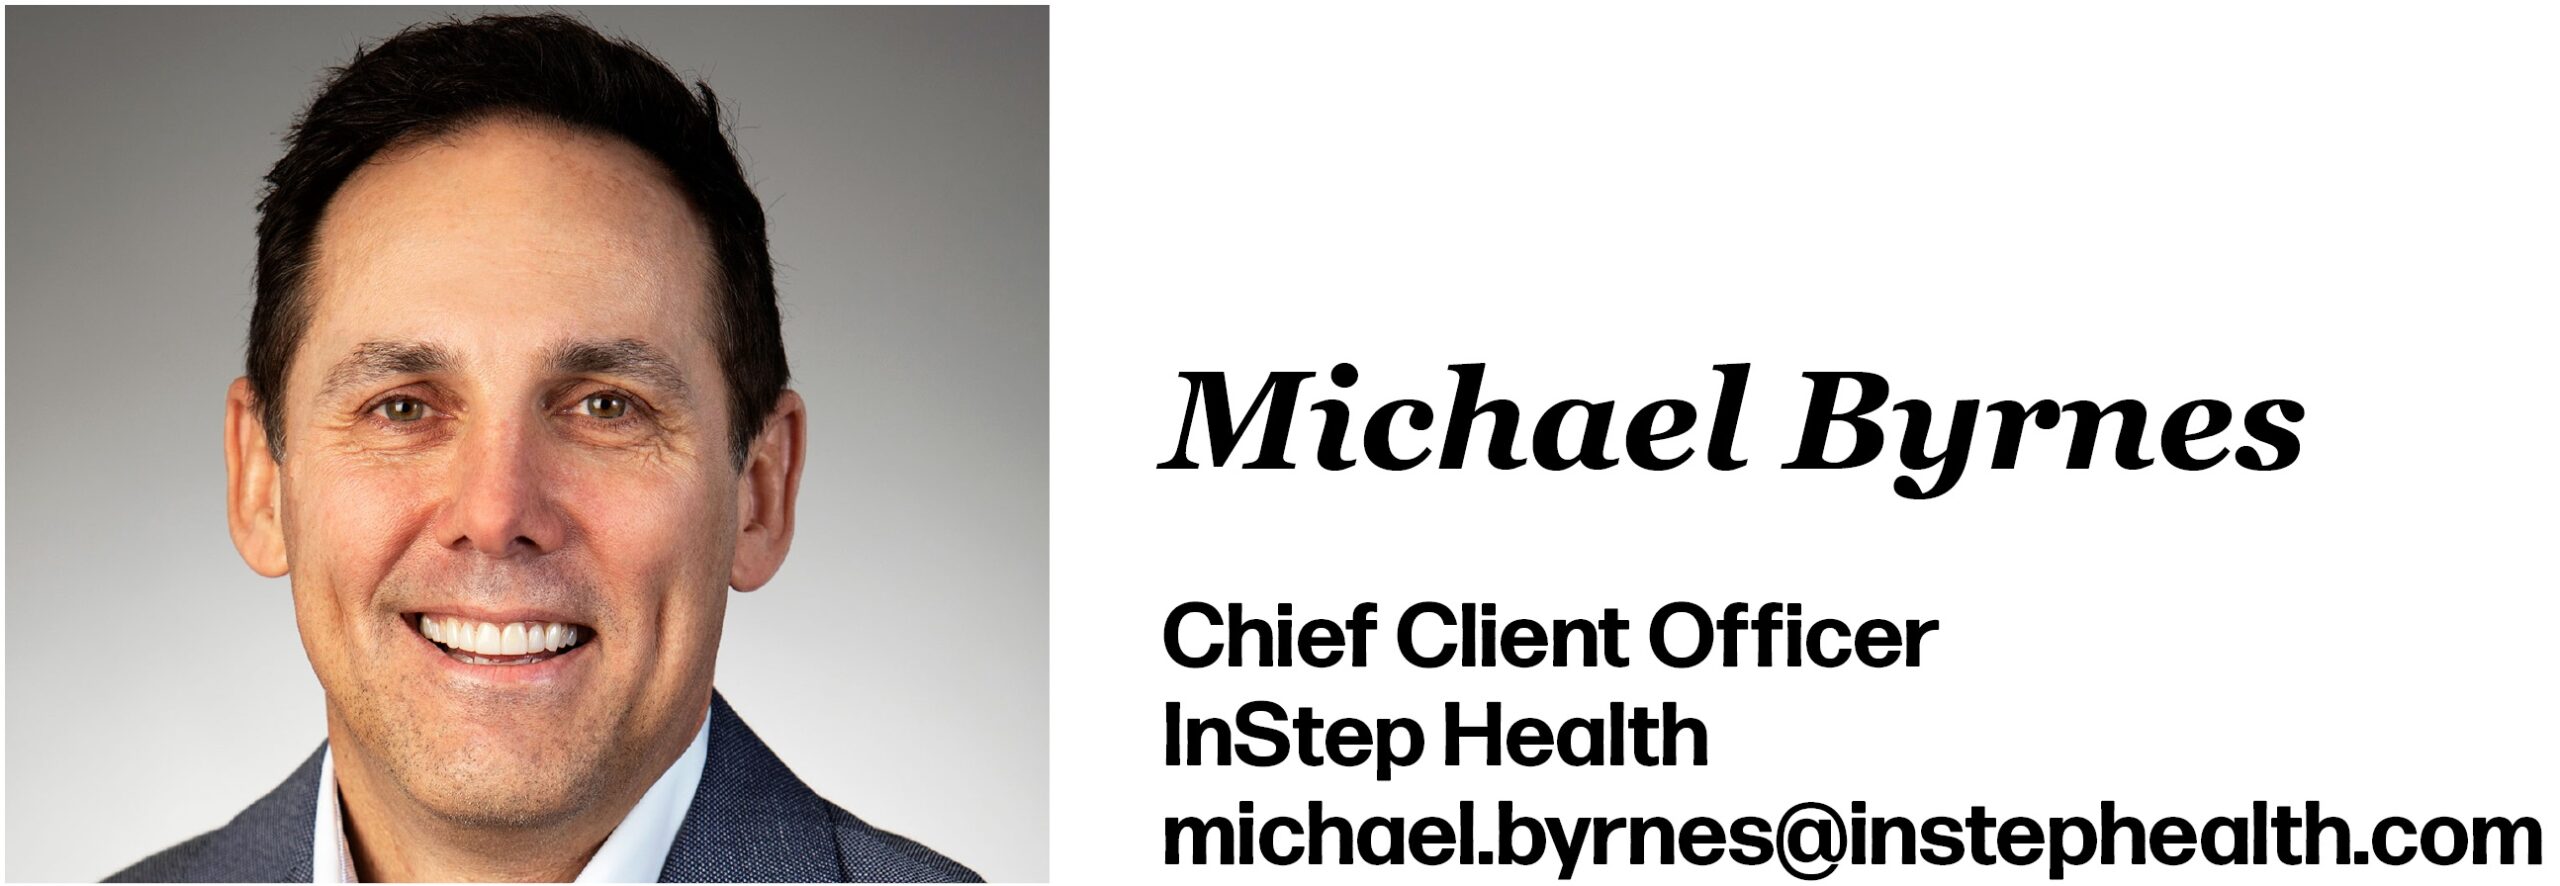 Michael Byrnes is Chief Client Officer at InStep Health. His email is michael.byrnes@instephealth.com.